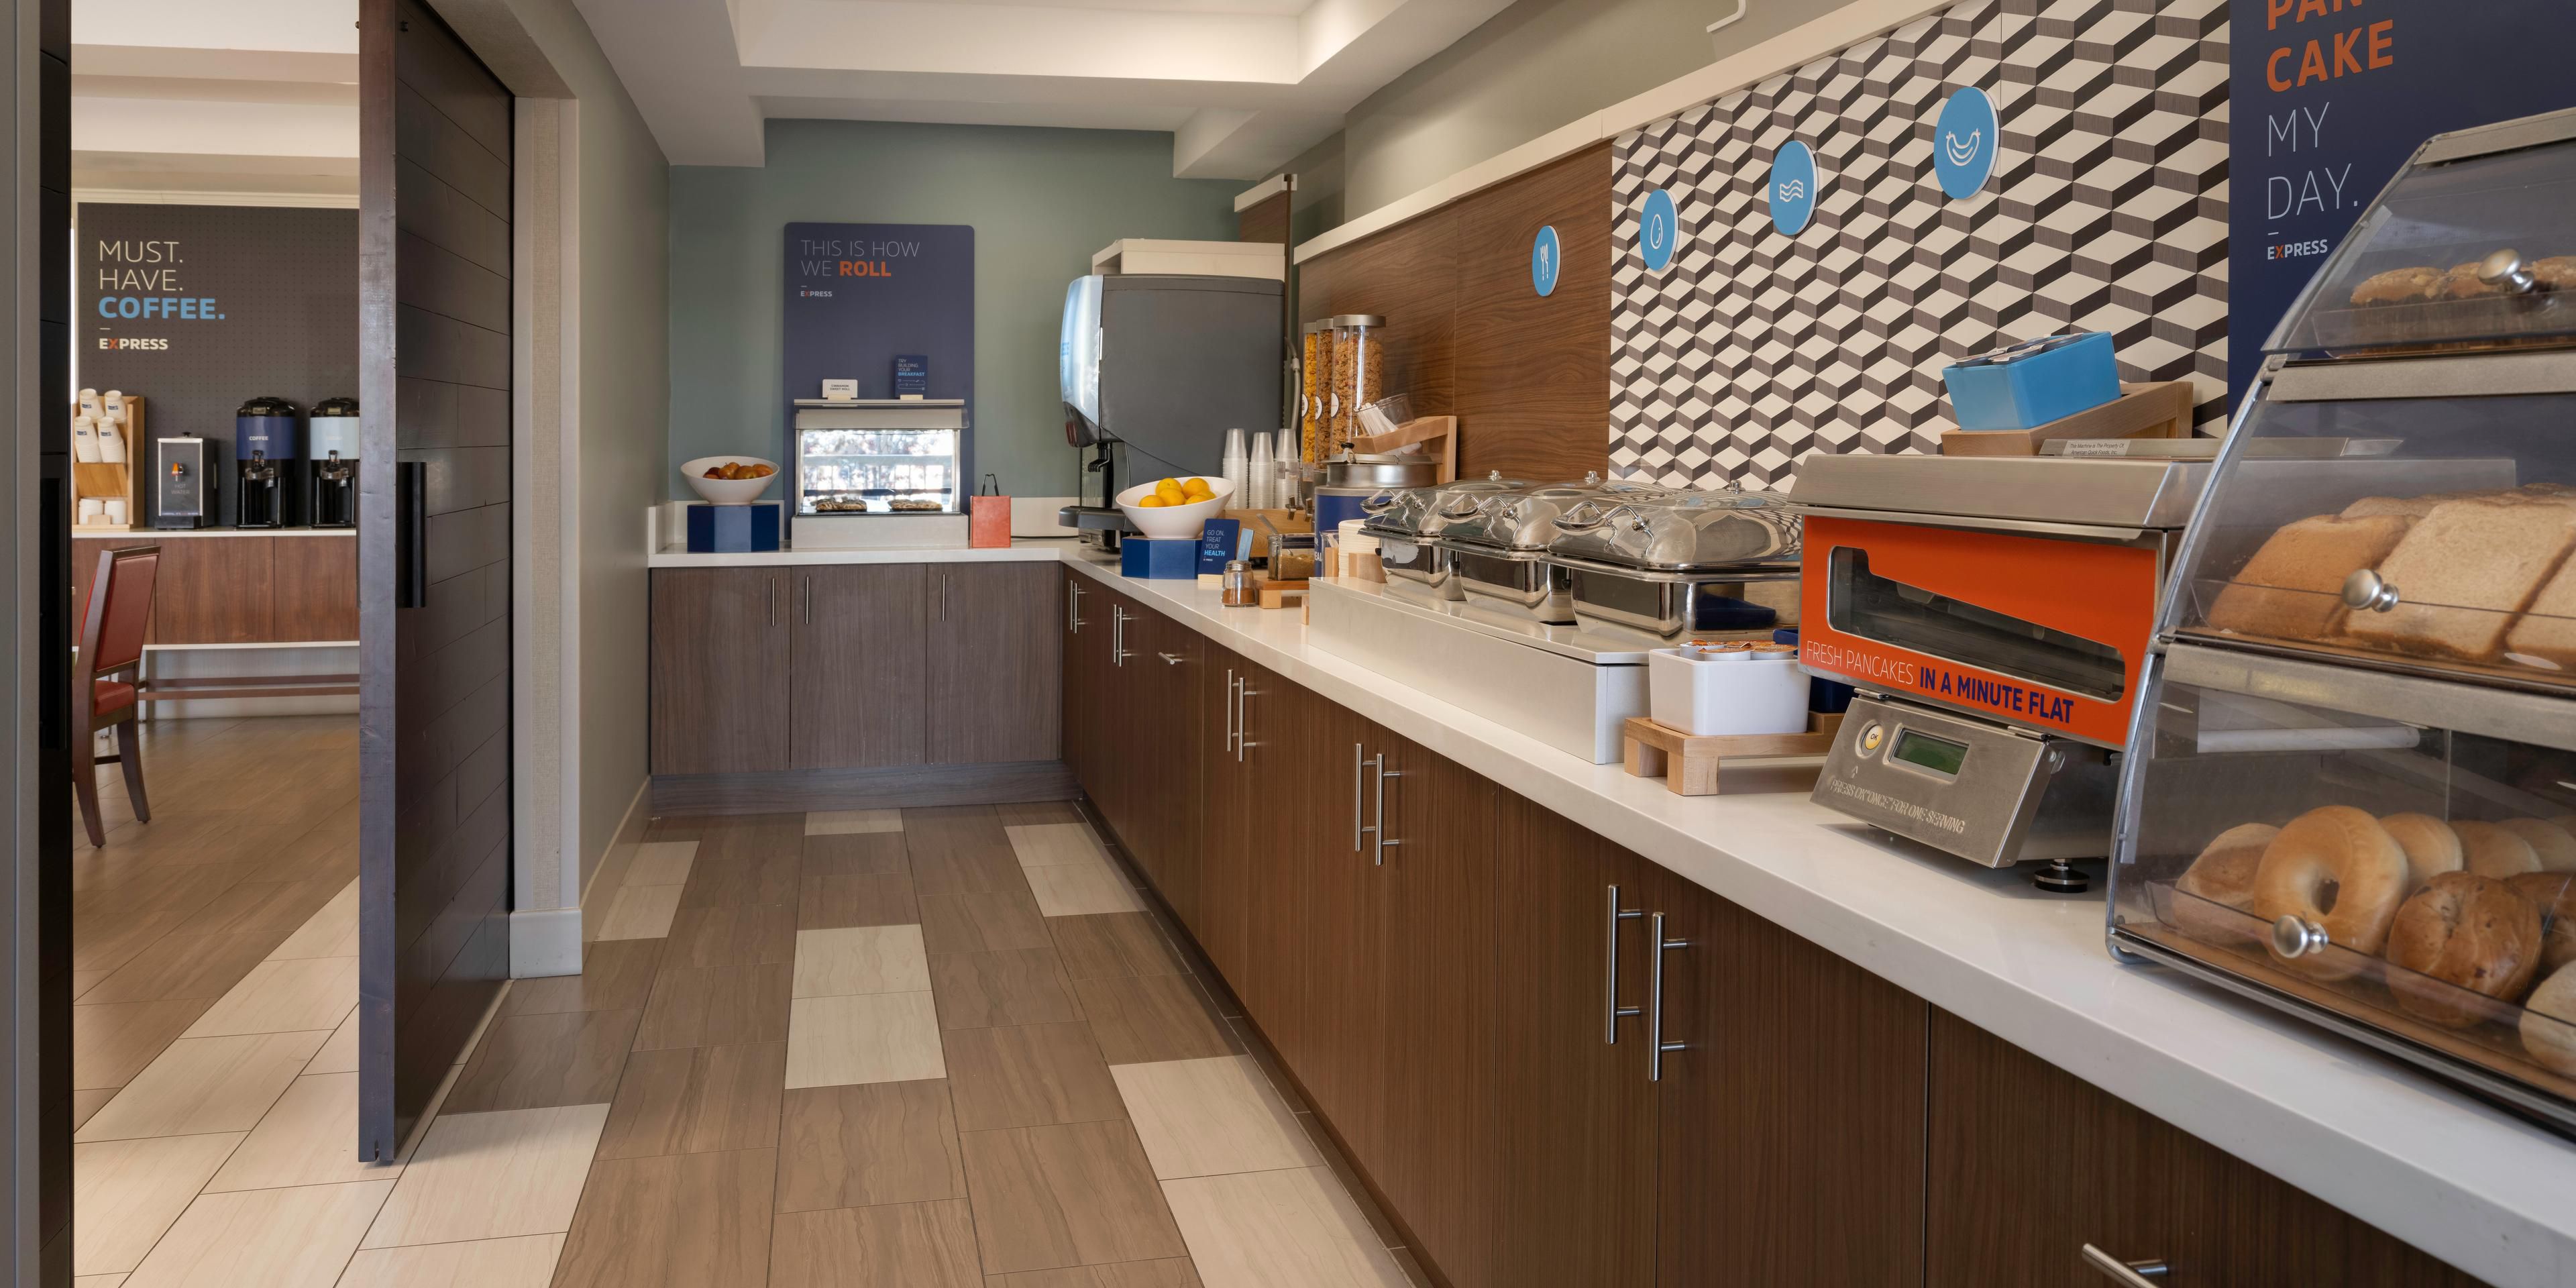 Wake up to our free Express start Breakfast bar offering a full range of breakfast items including omelets, bacon, sausage, chobani yogurt, gluten free muffins, whole wheat English muffins, oatmeal, cereal and one-touch pancake machine.